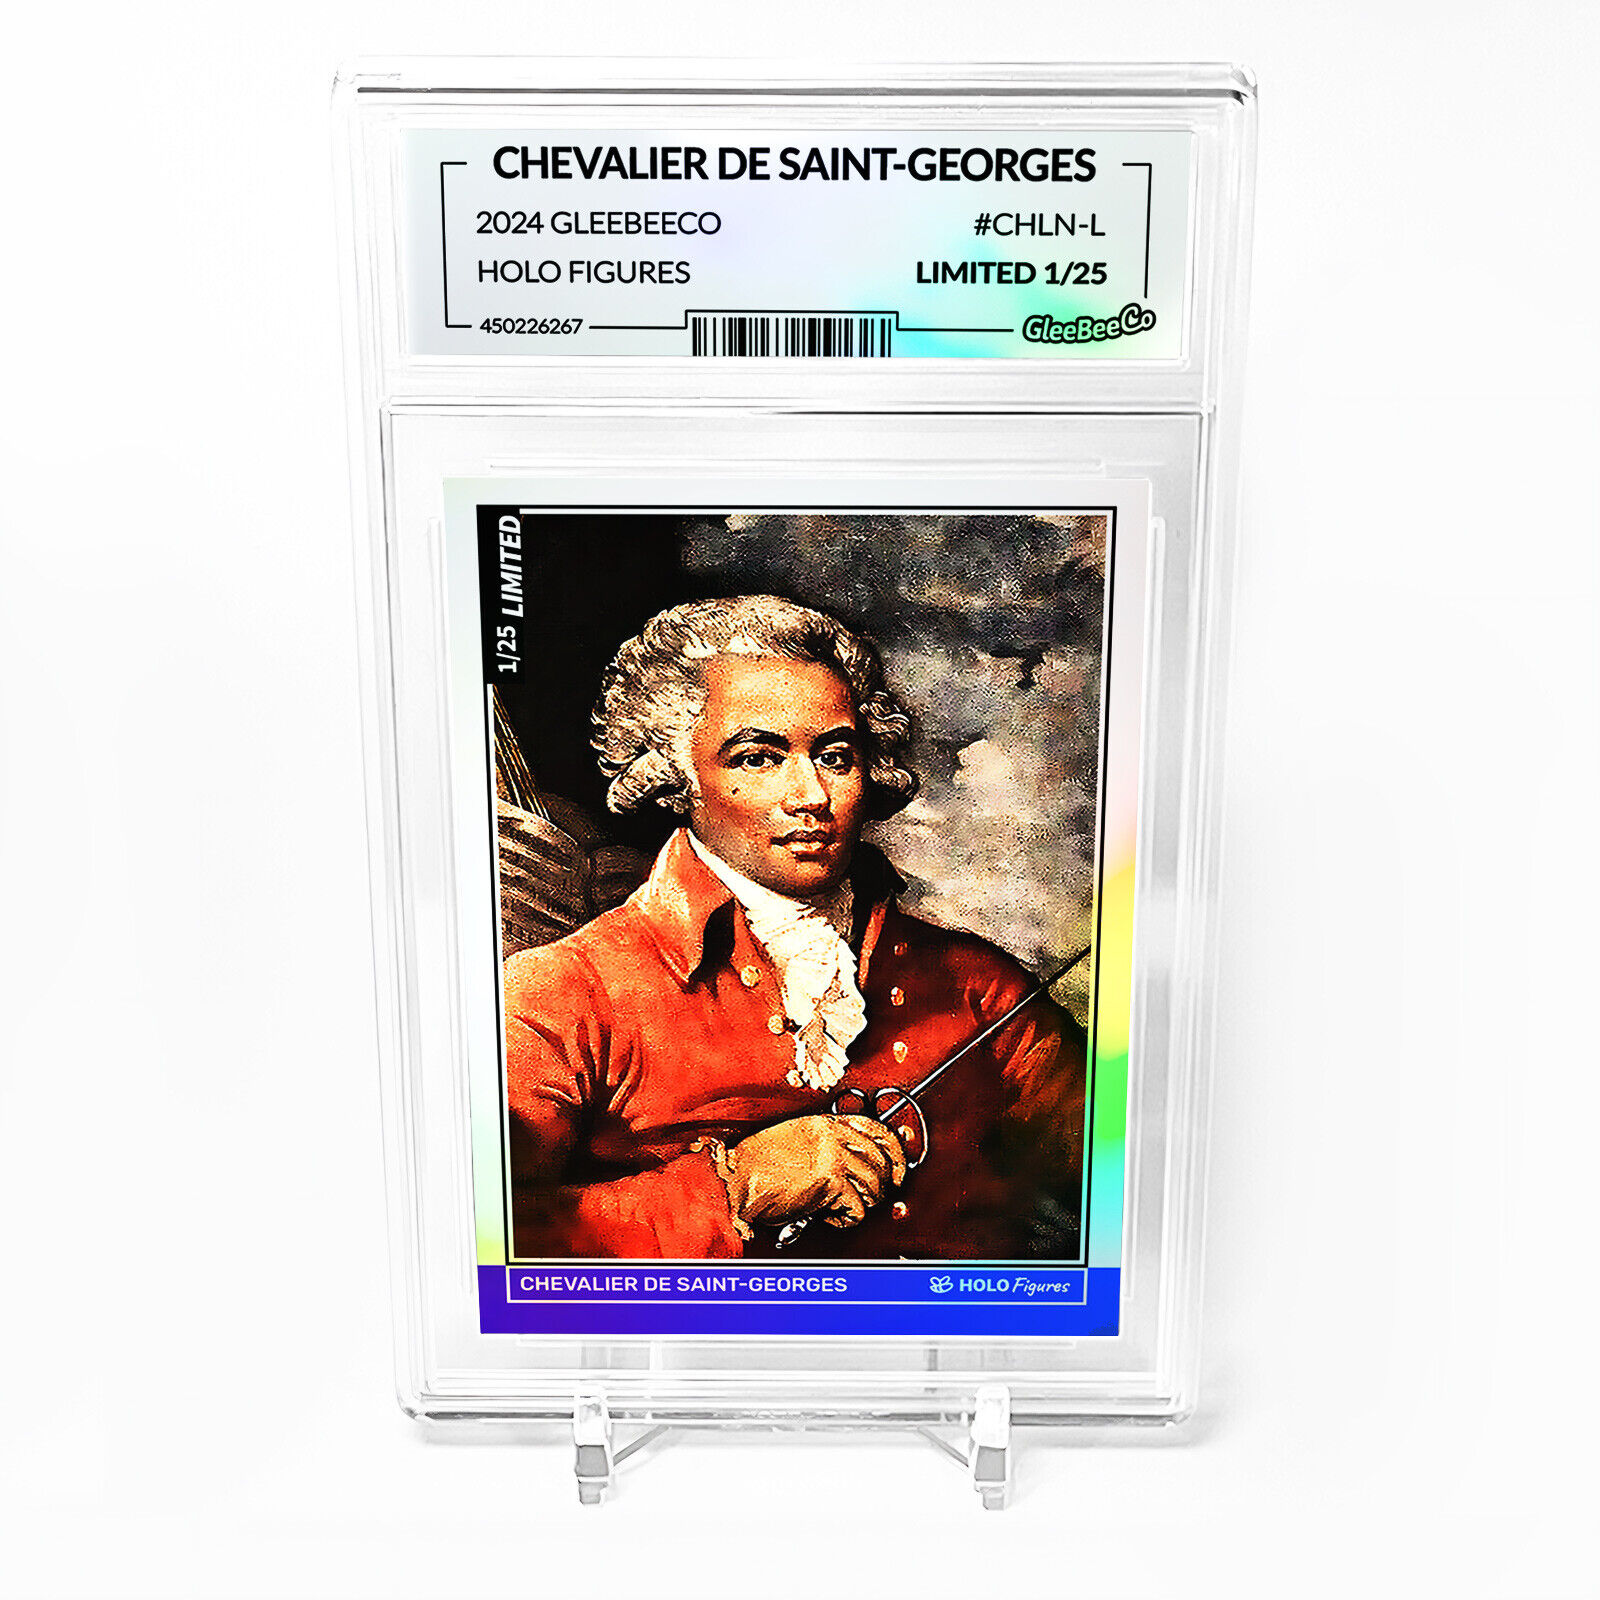 CHEVALIER DE SAINT-GEORGES Holographic Card GleeBeeCo #CHLN-L LIMITED to /25